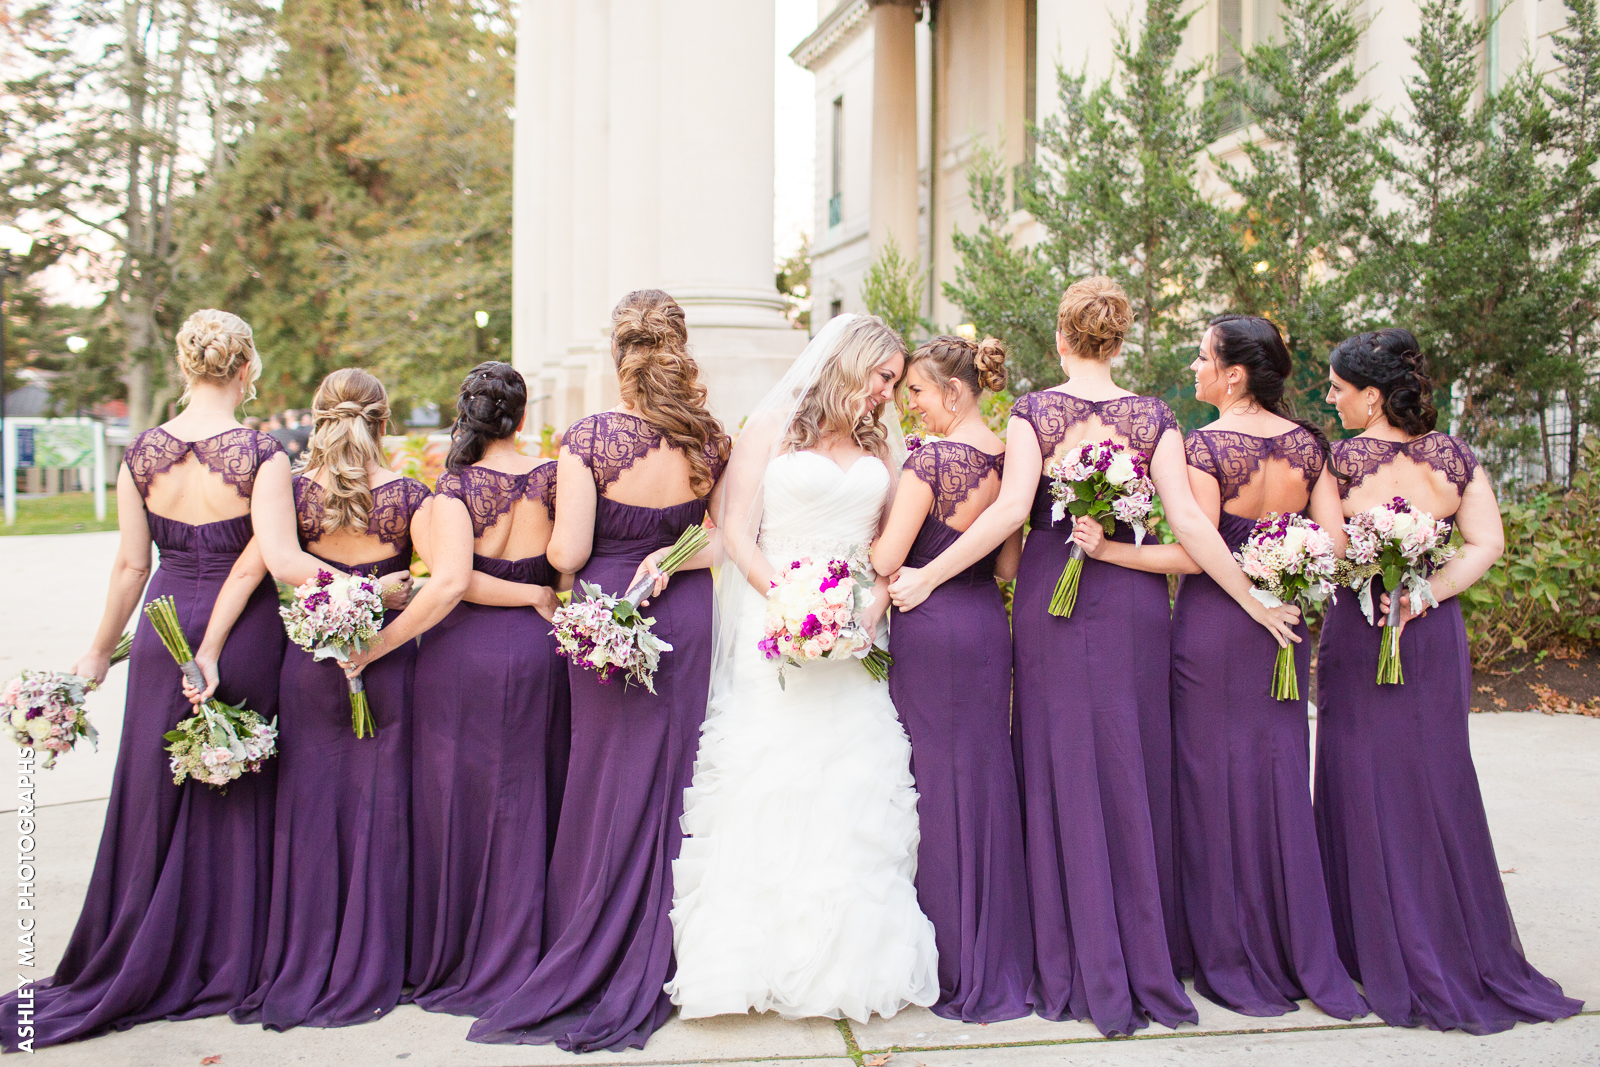 Great Bridesmaids Dresses for the 